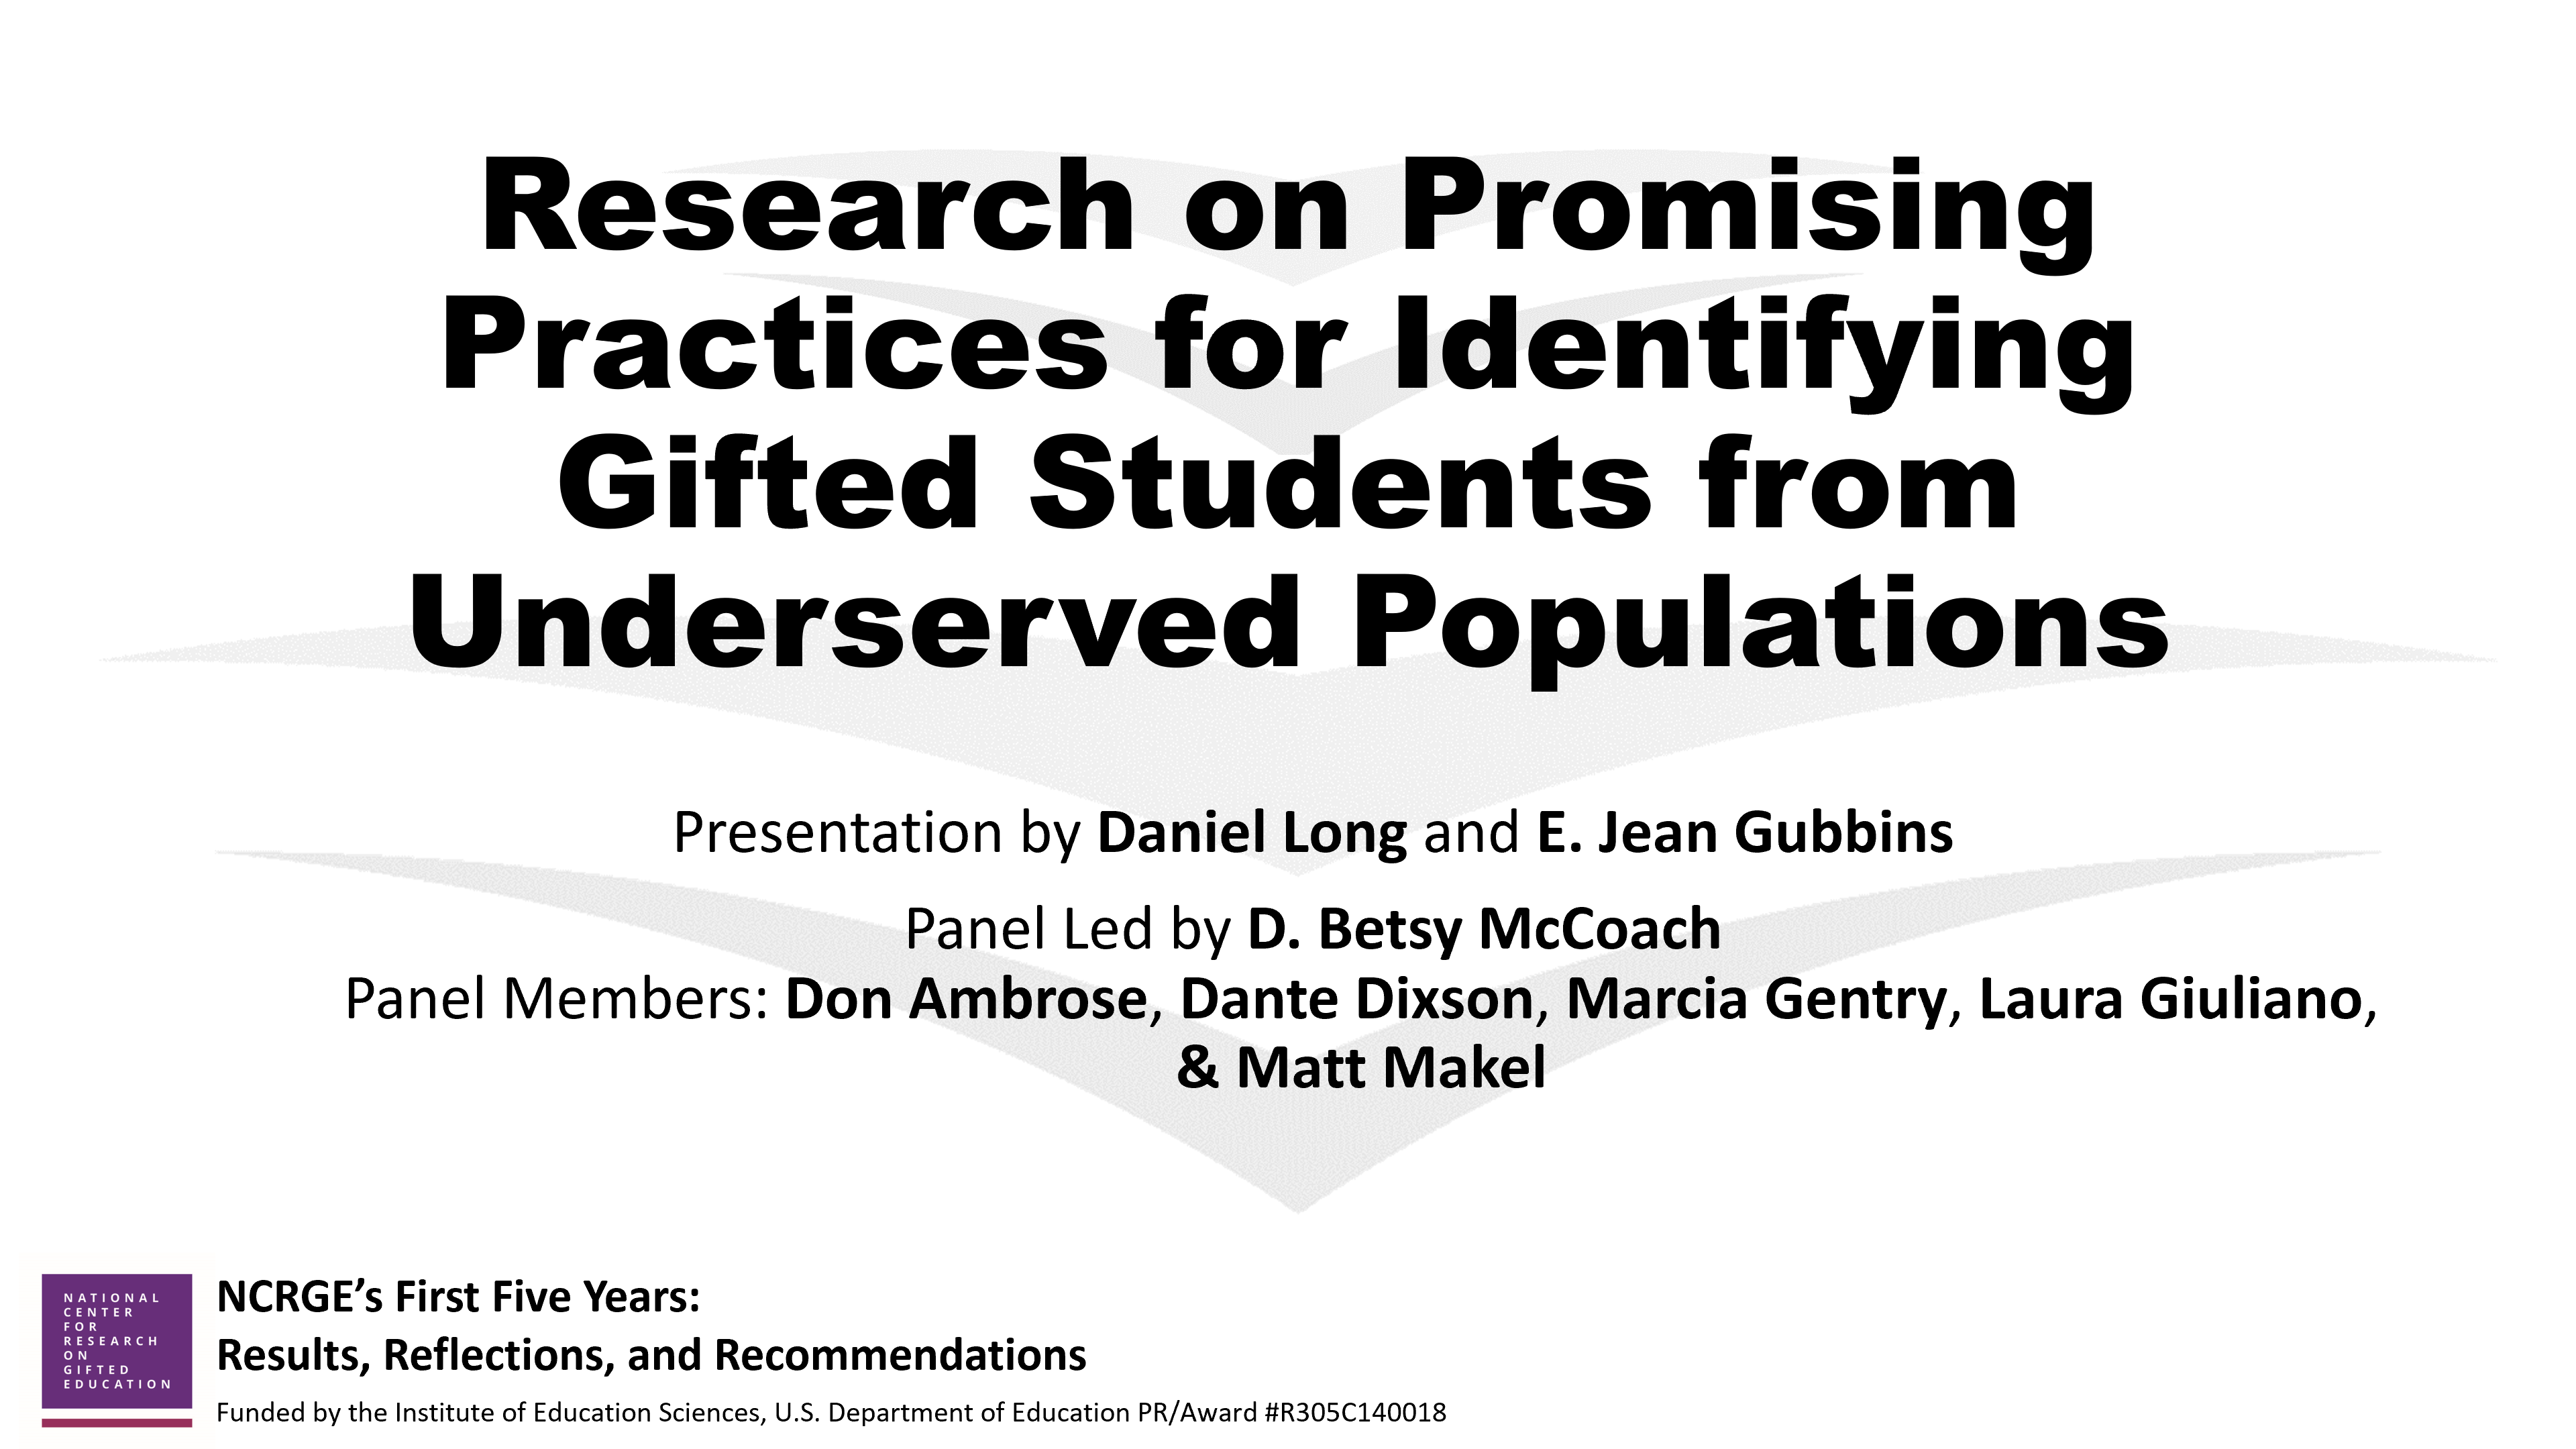 Research on Promising Practices